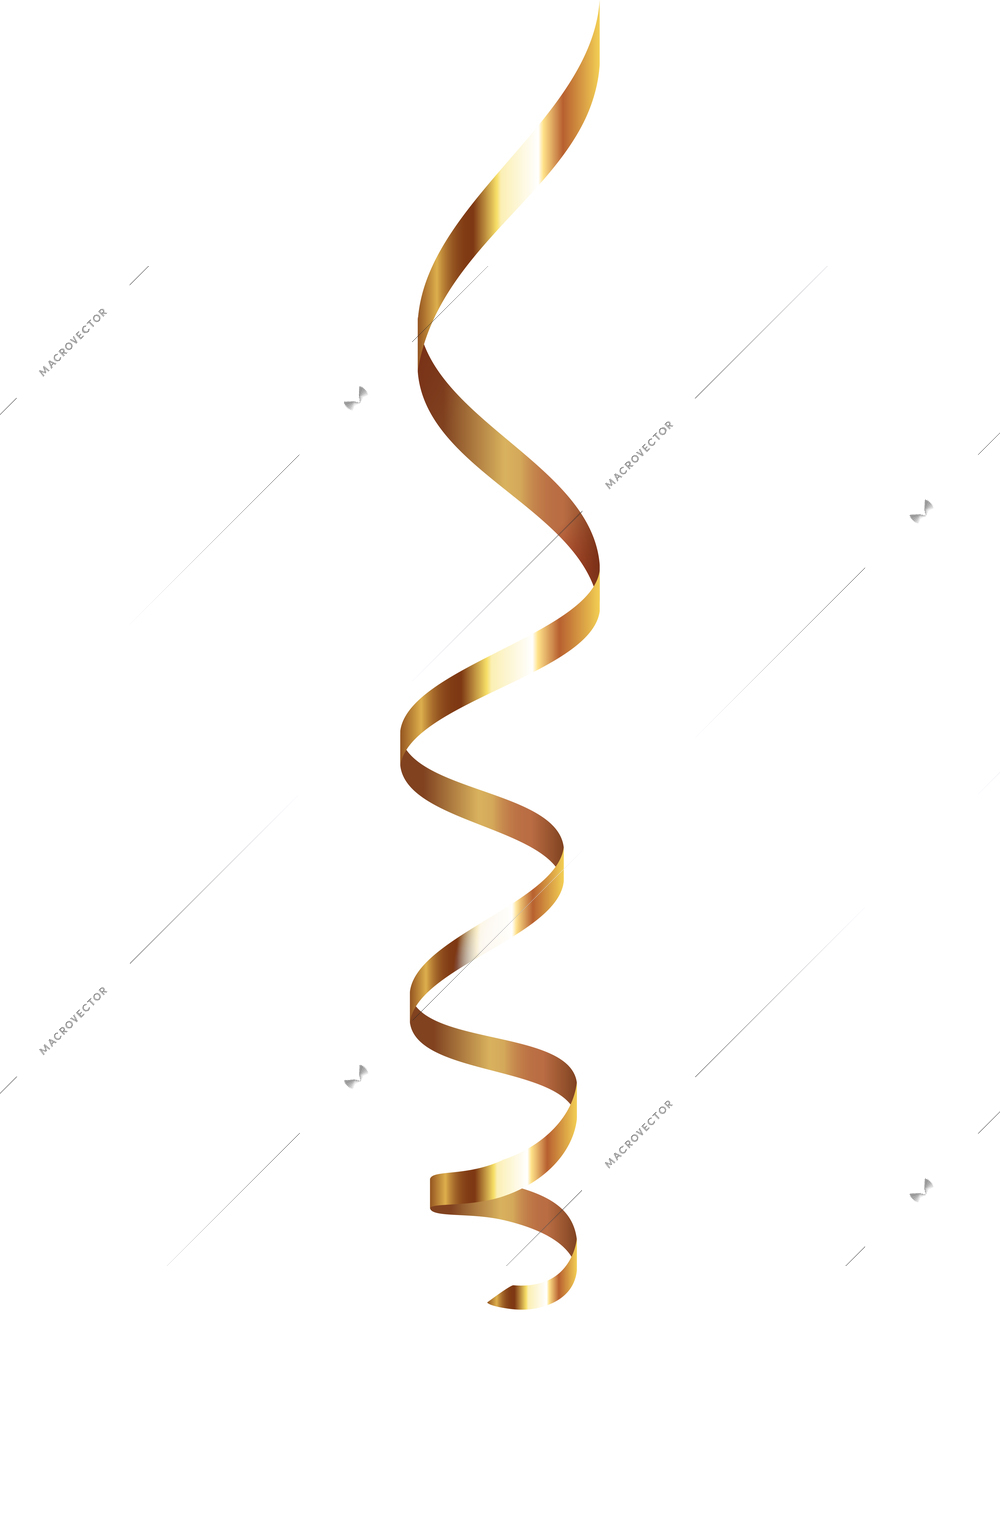 Curled ribbons serpentine realistic composition with isolated image of shiny festive decoration vector illustration